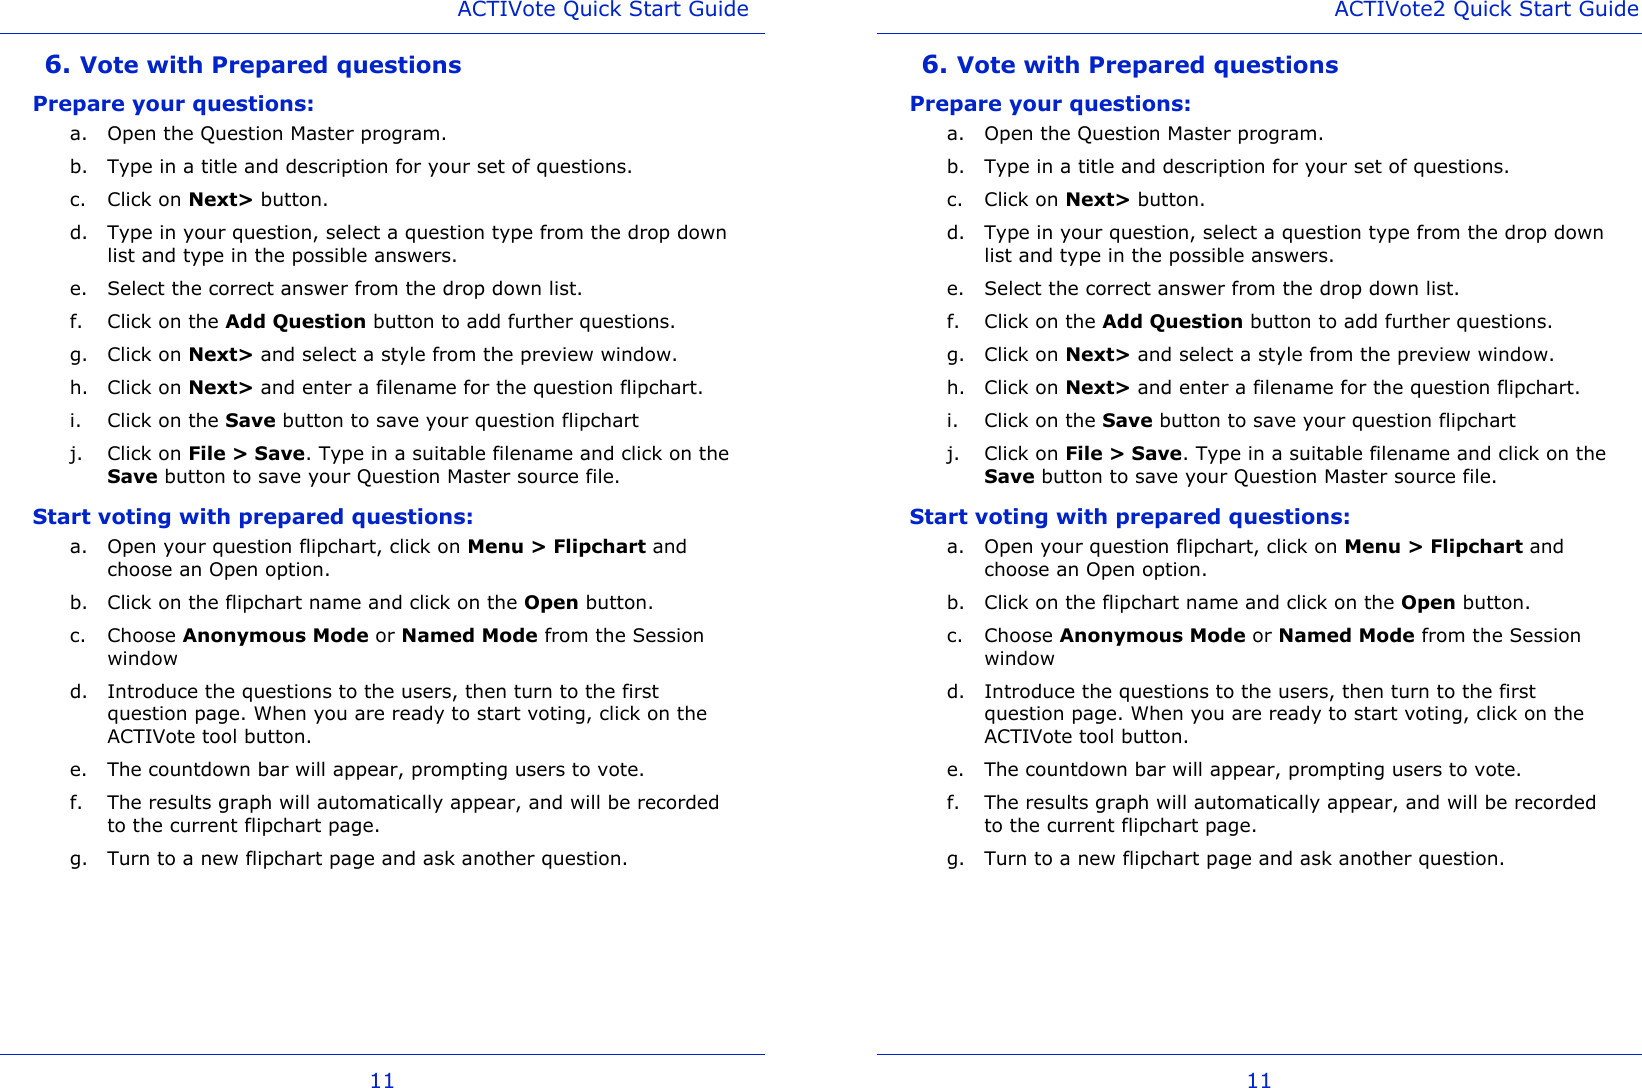 ACTIVote Quick Start Guide 11 6. Vote with Prepared questions Prepare your questions: a. Open the Question Master program. b. Type in a title and description for your set of questions. c. Click on Next&gt; button. d. Type in your question, select a question type from the drop down list and type in the possible answers. e. Select the correct answer from the drop down list. f. Click on the Add Question button to add further questions. g. Click on Next&gt; and select a style from the preview window. h. Click on Next&gt; and enter a filename for the question flipchart. i. Click on the Save button to save your question flipchart j. Click on File &gt; Save. Type in a suitable filename and click on the Save button to save your Question Master source file. Start voting with prepared questions: a. Open your question flipchart, click on Menu &gt; Flipchart and choose an Open option.  b. Click on the flipchart name and click on the Open button. c. Choose Anonymous Mode or Named Mode from the Session window d. Introduce the questions to the users, then turn to the first question page. When you are ready to start voting, click on the ACTIVote tool button. e. The countdown bar will appear, prompting users to vote. f. The results graph will automatically appear, and will be recorded to the current flipchart page. g. Turn to a new flipchart page and ask another question. ACTIVote2 Quick Start Guide 11 6. Vote with Prepared questions Prepare your questions: a. Open the Question Master program. b. Type in a title and description for your set of questions. c. Click on Next&gt; button. d. Type in your question, select a question type from the drop down list and type in the possible answers. e. Select the correct answer from the drop down list. f. Click on the Add Question button to add further questions. g. Click on Next&gt; and select a style from the preview window. h. Click on Next&gt; and enter a filename for the question flipchart. i. Click on the Save button to save your question flipchart j. Click on File &gt; Save. Type in a suitable filename and click on the Save button to save your Question Master source file. Start voting with prepared questions: a. Open your question flipchart, click on Menu &gt; Flipchart and choose an Open option.  b. Click on the flipchart name and click on the Open button. c. Choose Anonymous Mode or Named Mode from the Session window d. Introduce the questions to the users, then turn to the first question page. When you are ready to start voting, click on the ACTIVote tool button. e. The countdown bar will appear, prompting users to vote. f. The results graph will automatically appear, and will be recorded to the current flipchart page. g. Turn to a new flipchart page and ask another question. 